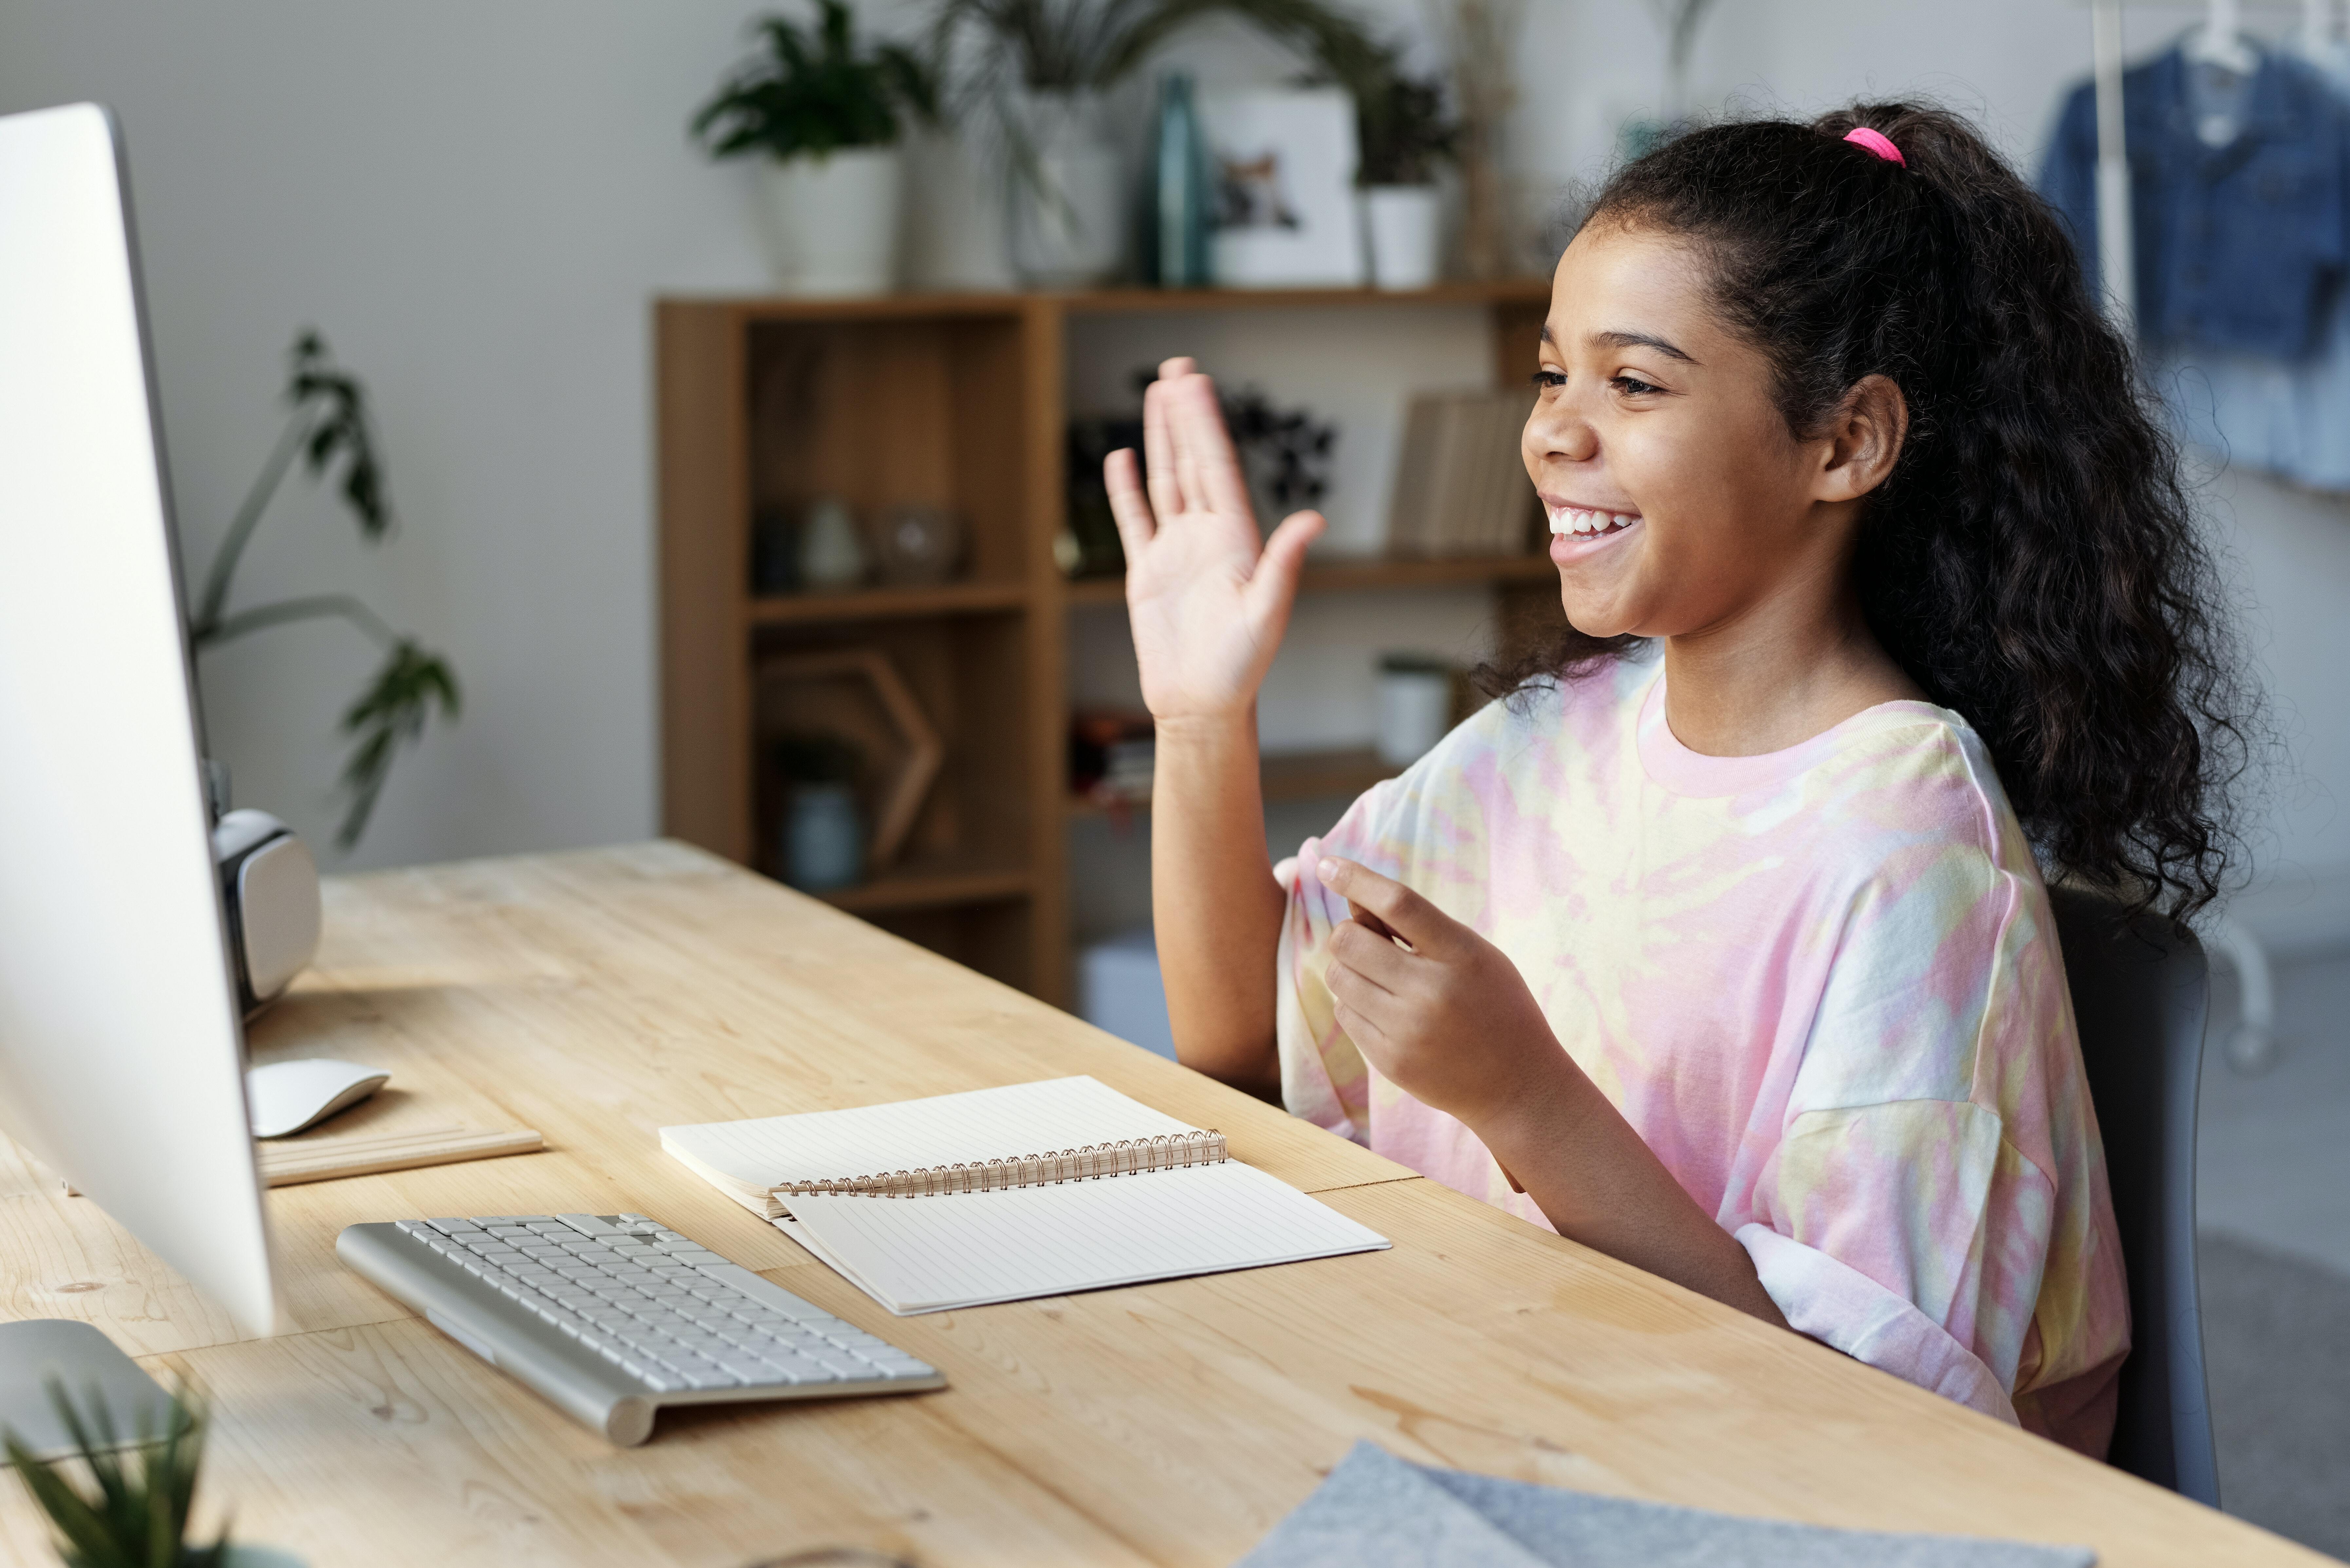 A child smiling during an online meeting and raising her hand.